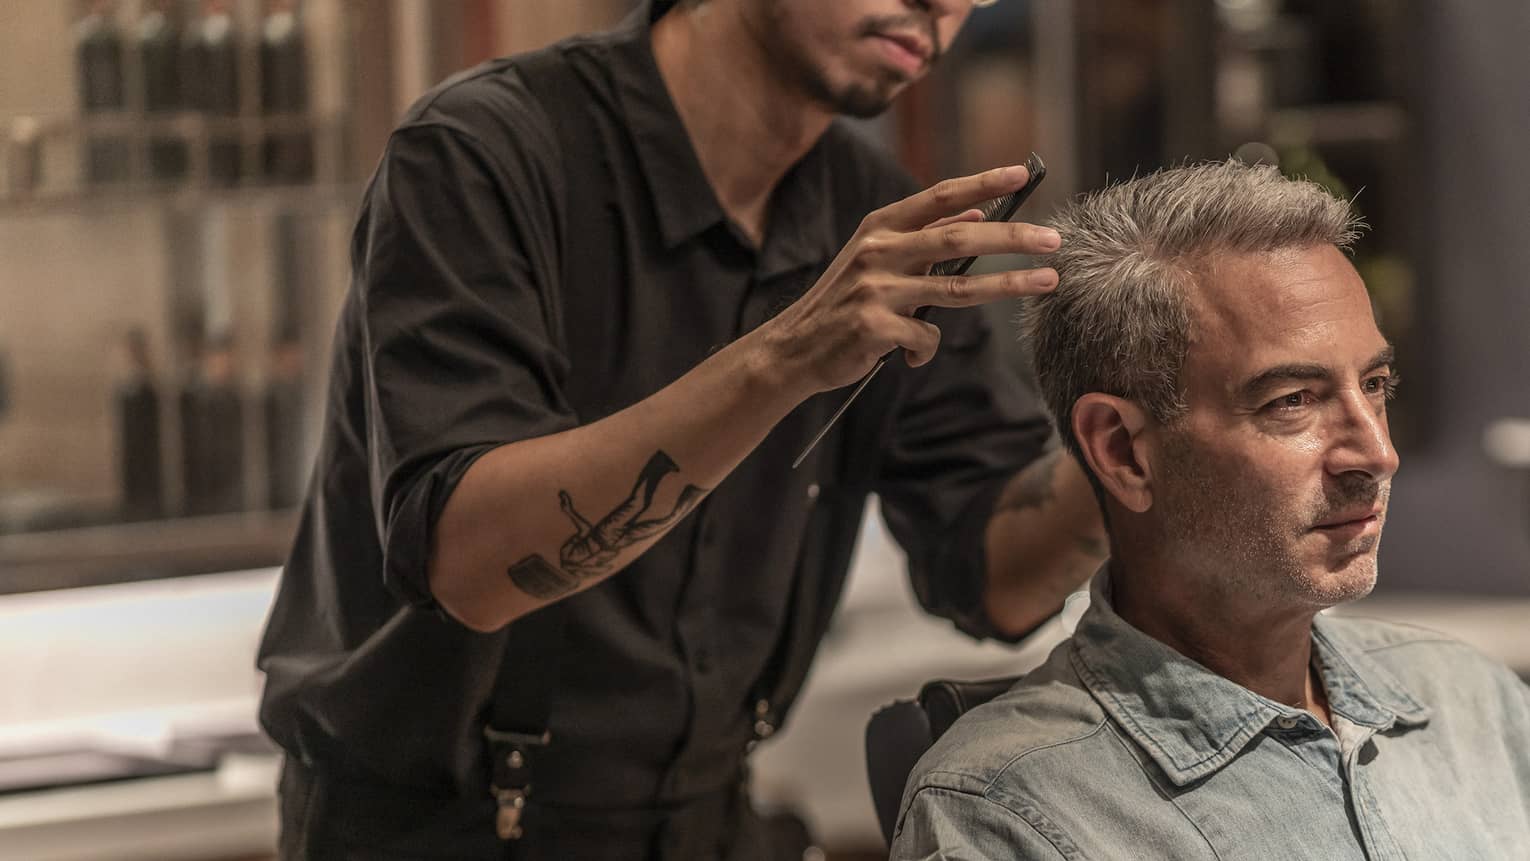 Man receives haircut in the Spa's barbershop